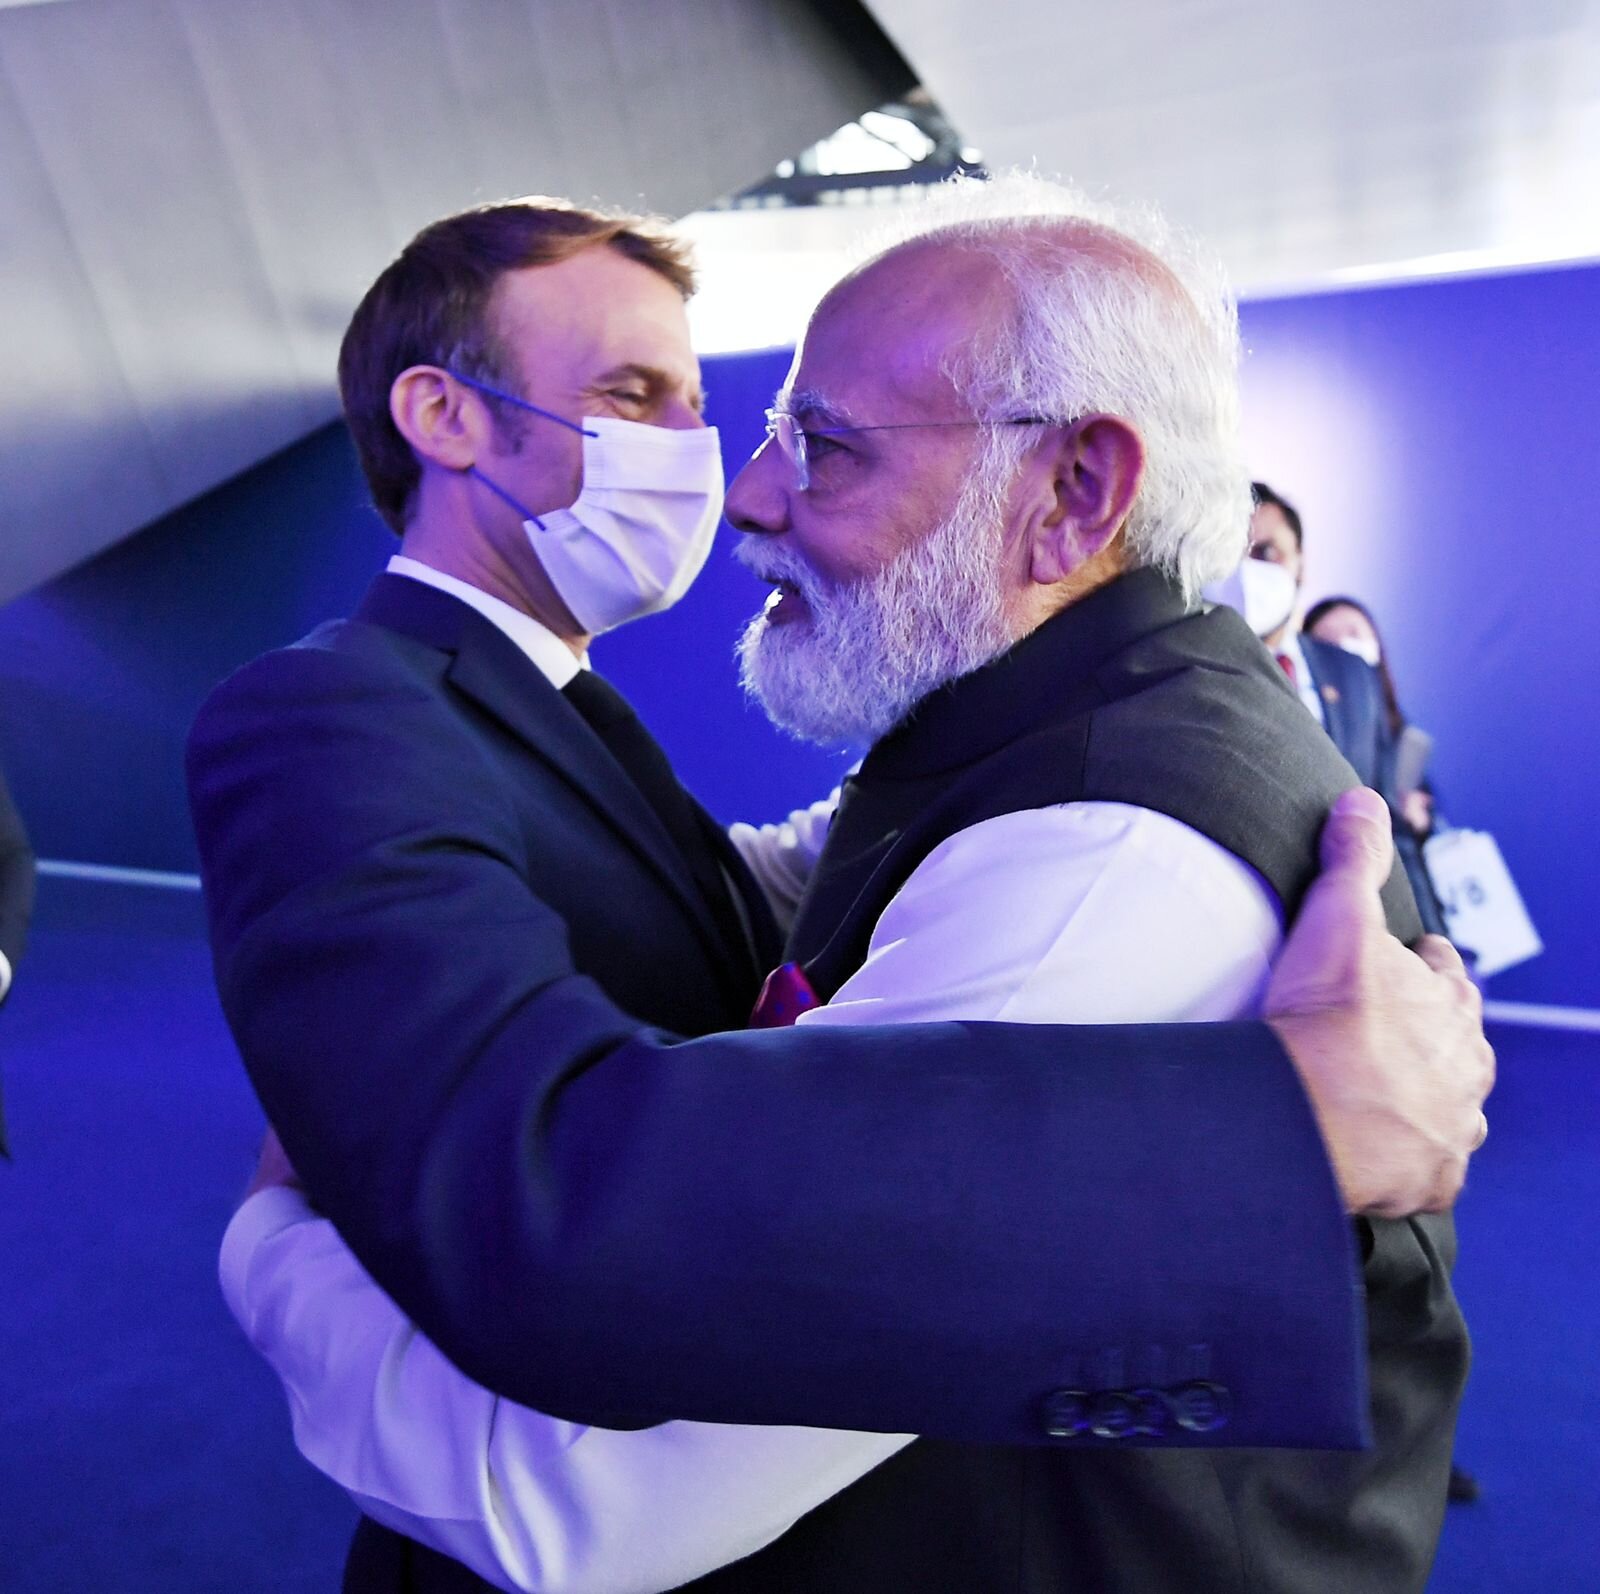 G20 Summit 2021: PM Modi Meets World Leaders in Rome | In Pictures